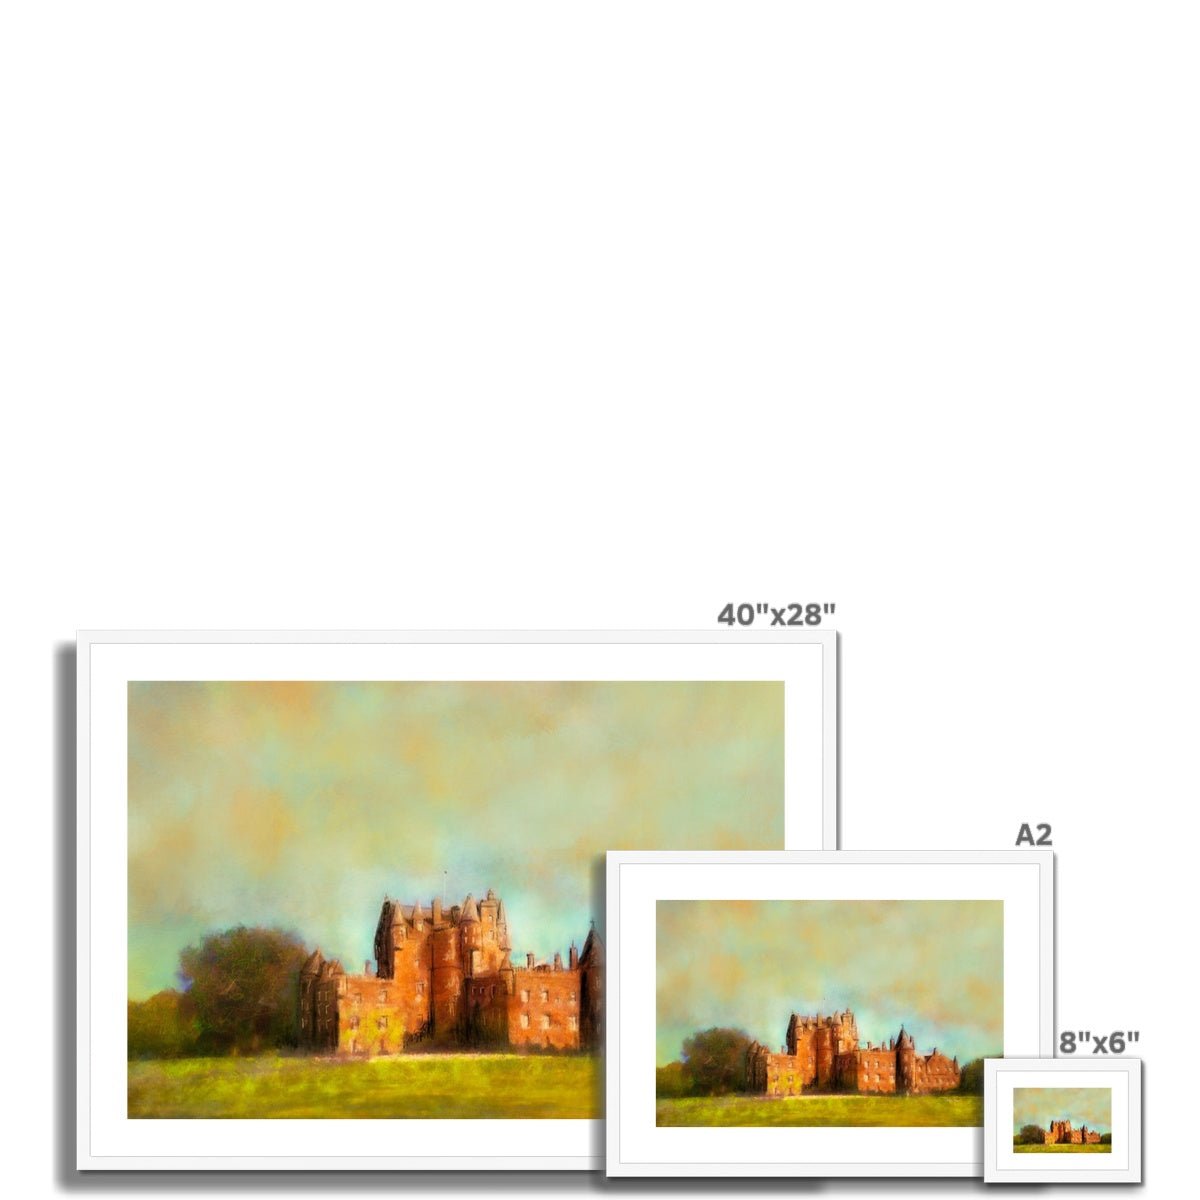 Glamis Castle Painting | Framed & Mounted Prints From Scotland-Framed & Mounted Prints-Historic & Iconic Scotland Art Gallery-Paintings, Prints, Homeware, Art Gifts From Scotland By Scottish Artist Kevin Hunter